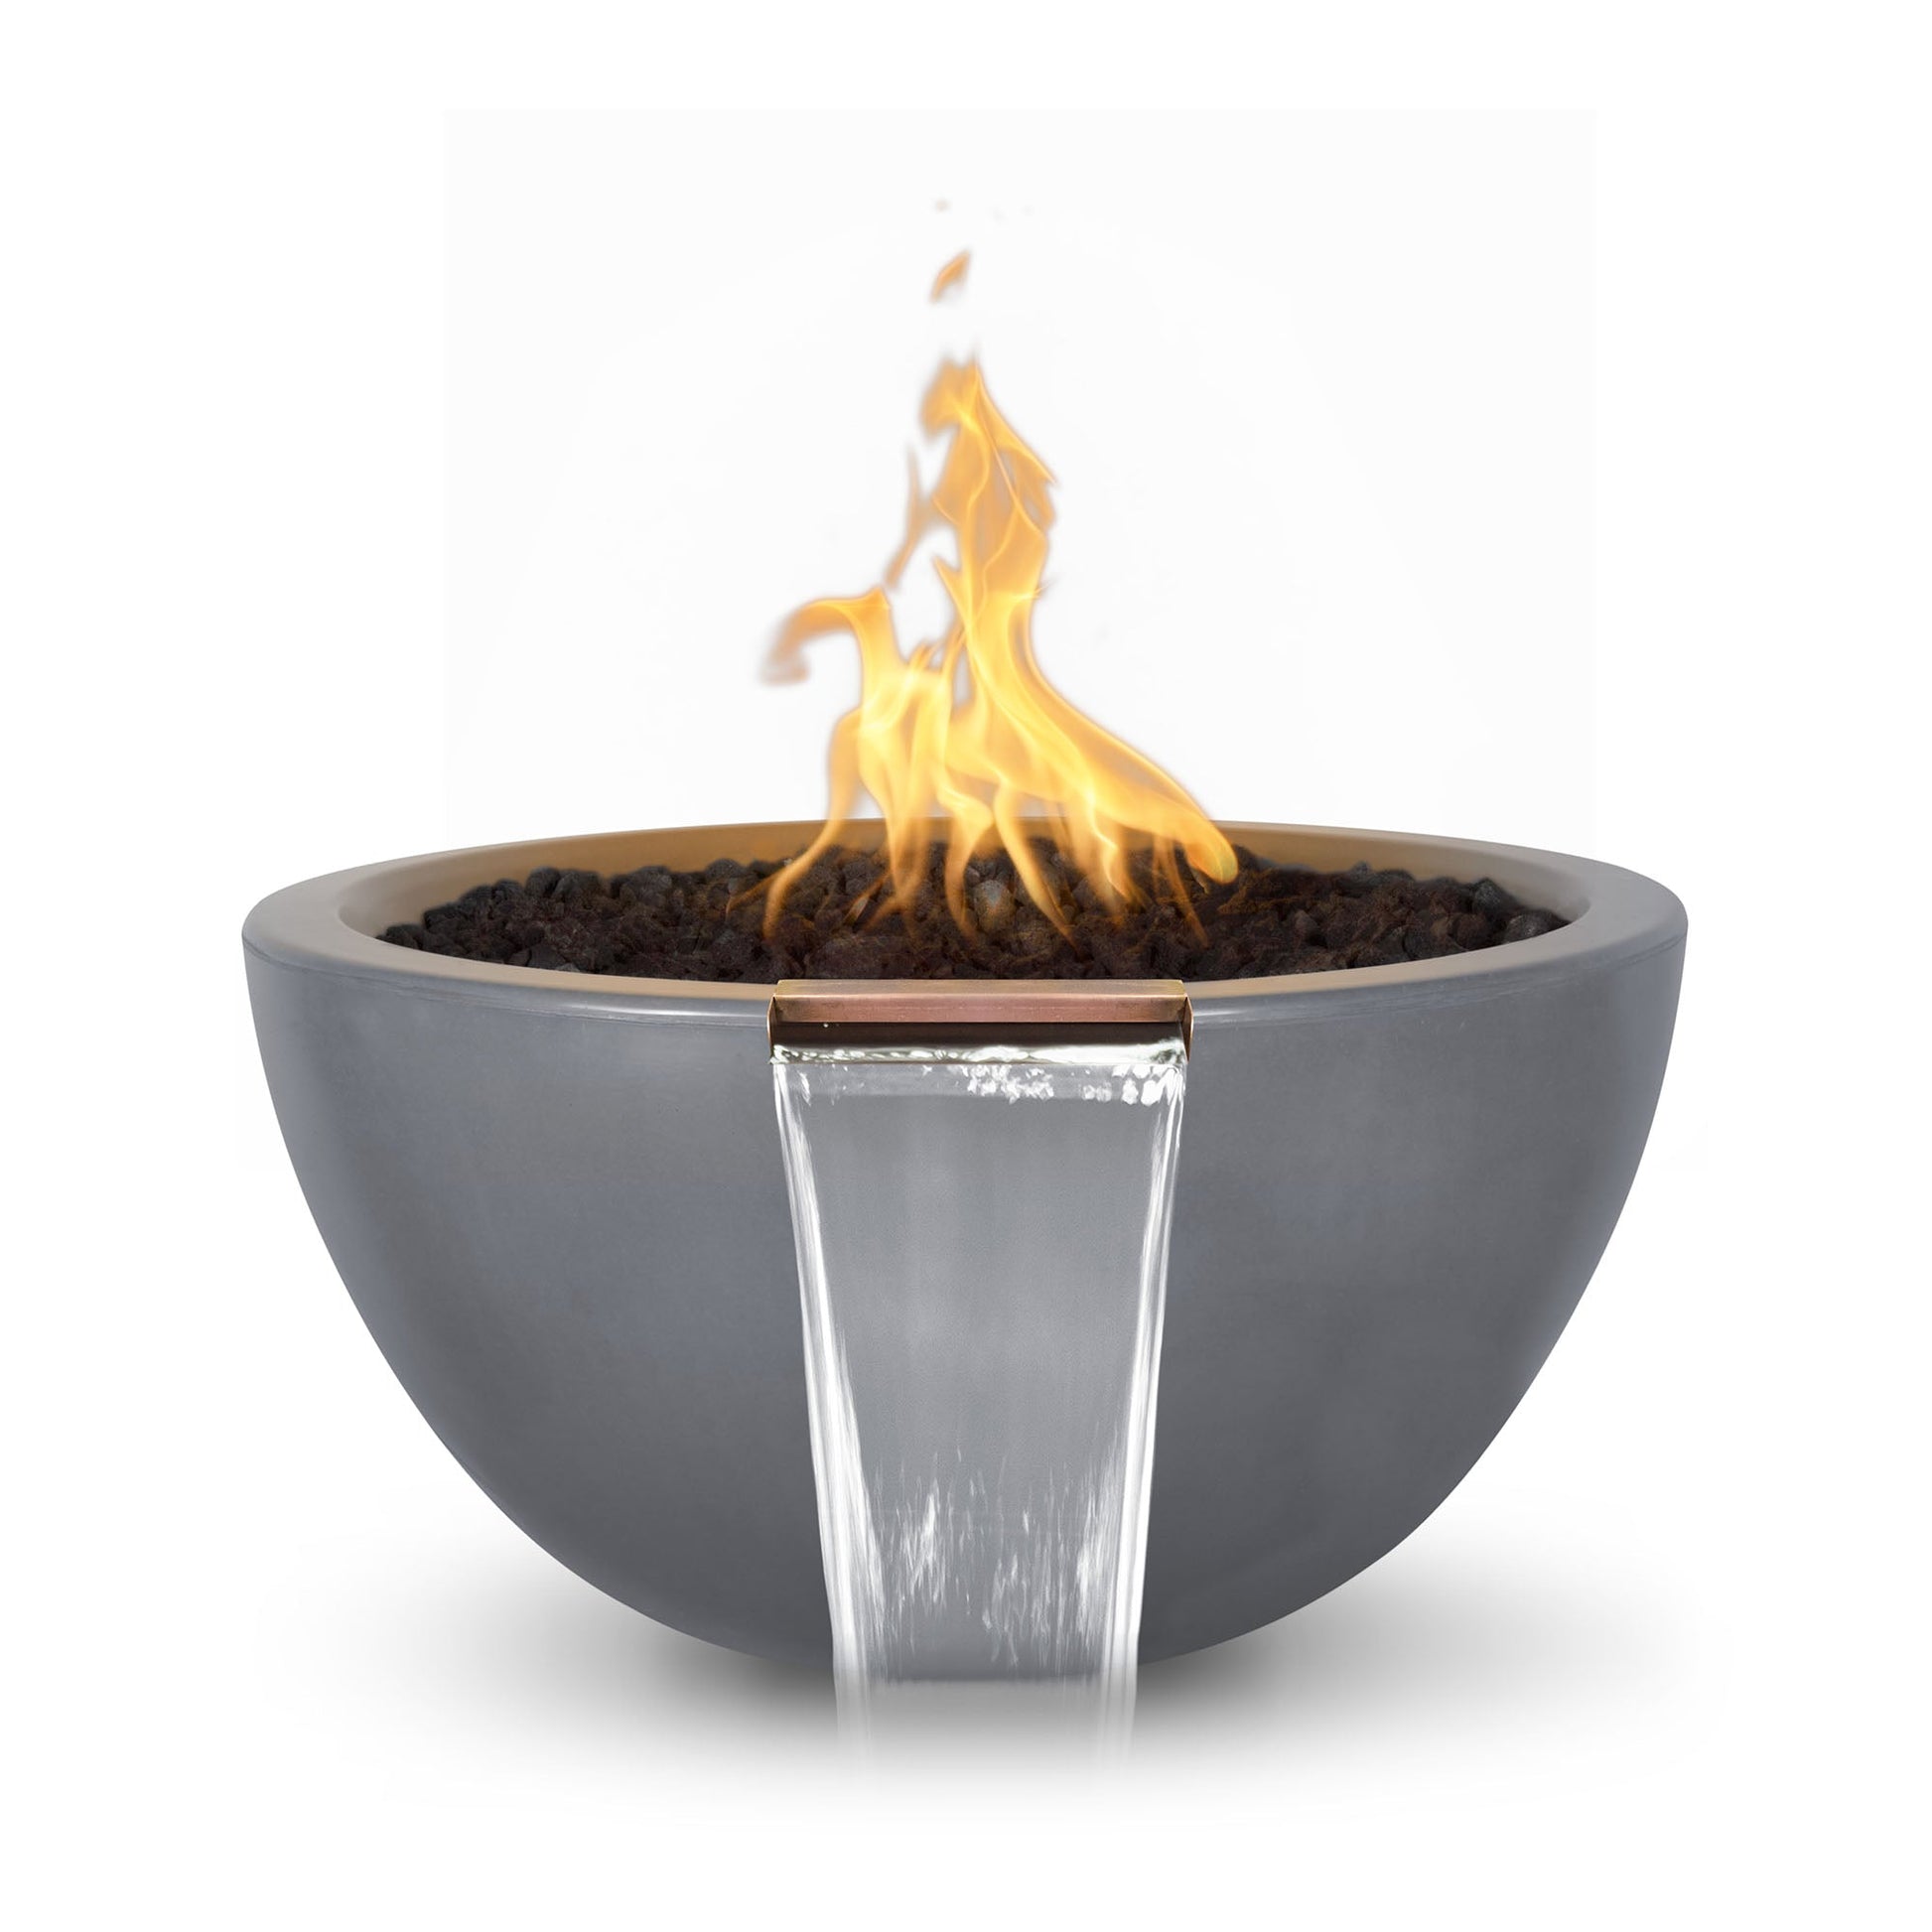 The Outdoor Plus Round Luna 38" Gray GFRC Concrete Liquid Propane Fire & Water Bowl with Match Lit with Flame Sense Ignition